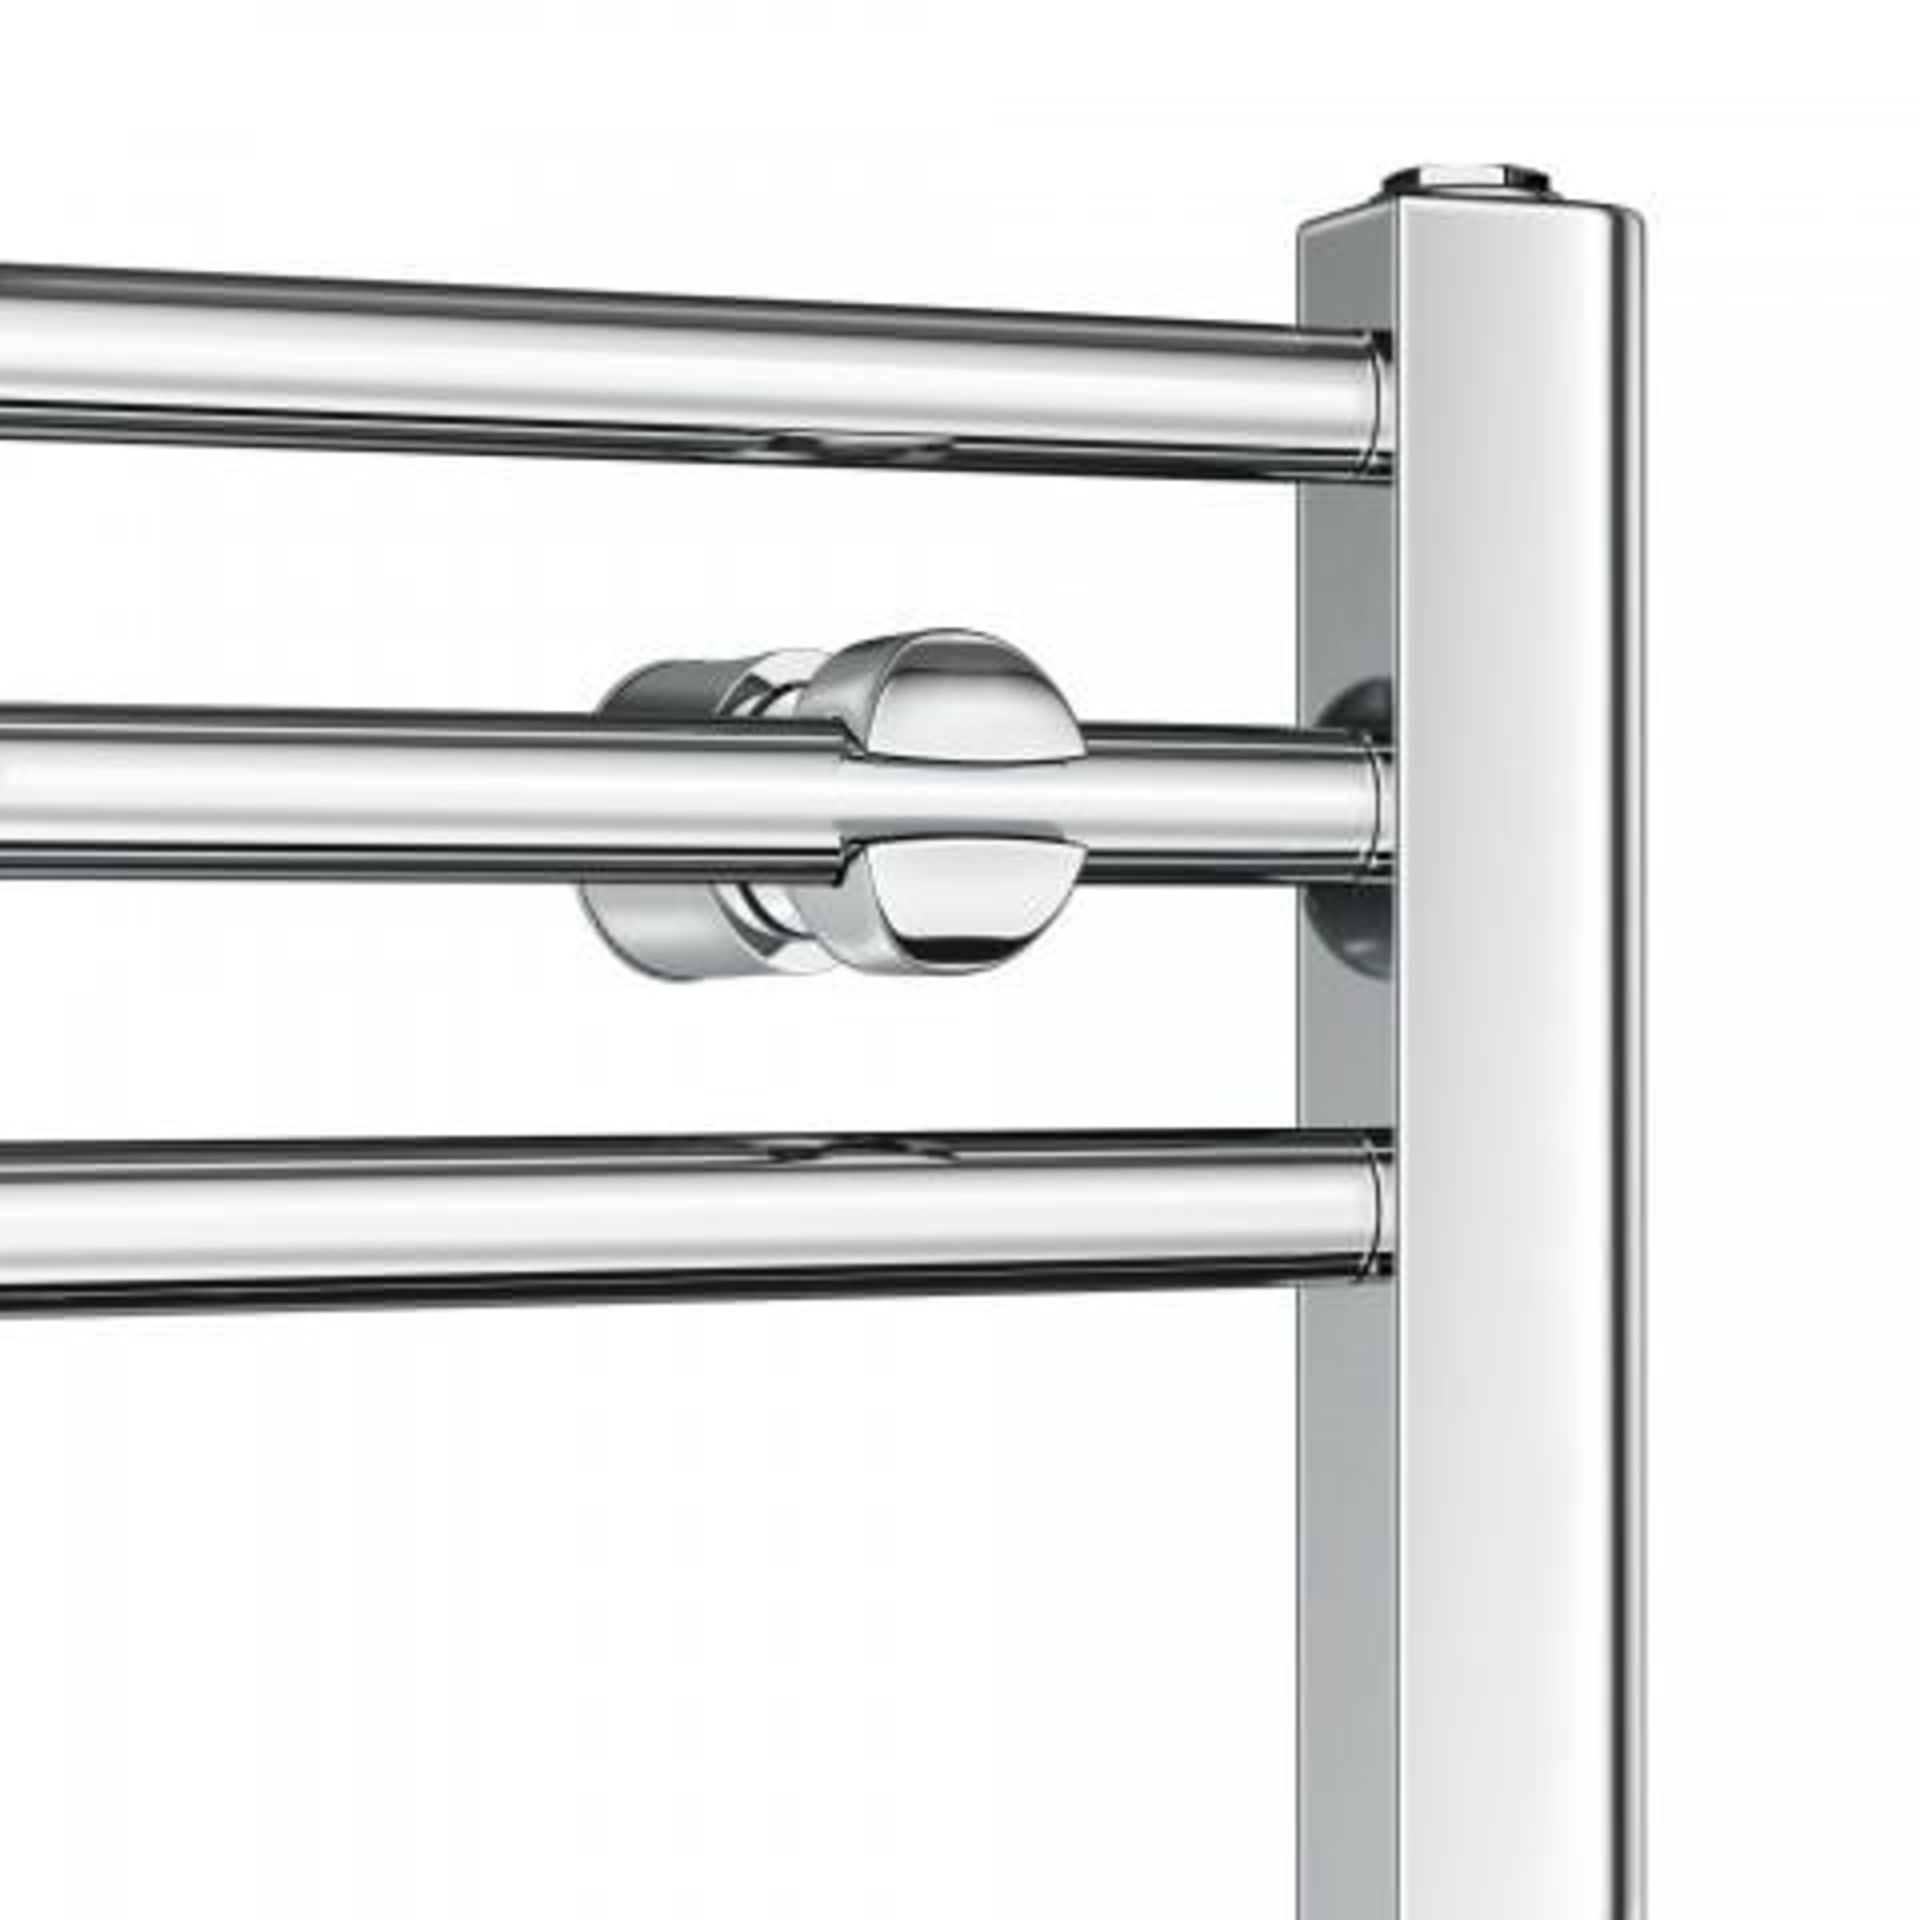 BRAND NEW BOXED 1200x600mm - 20mm Tubes - Chrome Heated Straight Rail Ladder Towel Radiator. R... - Image 4 of 4